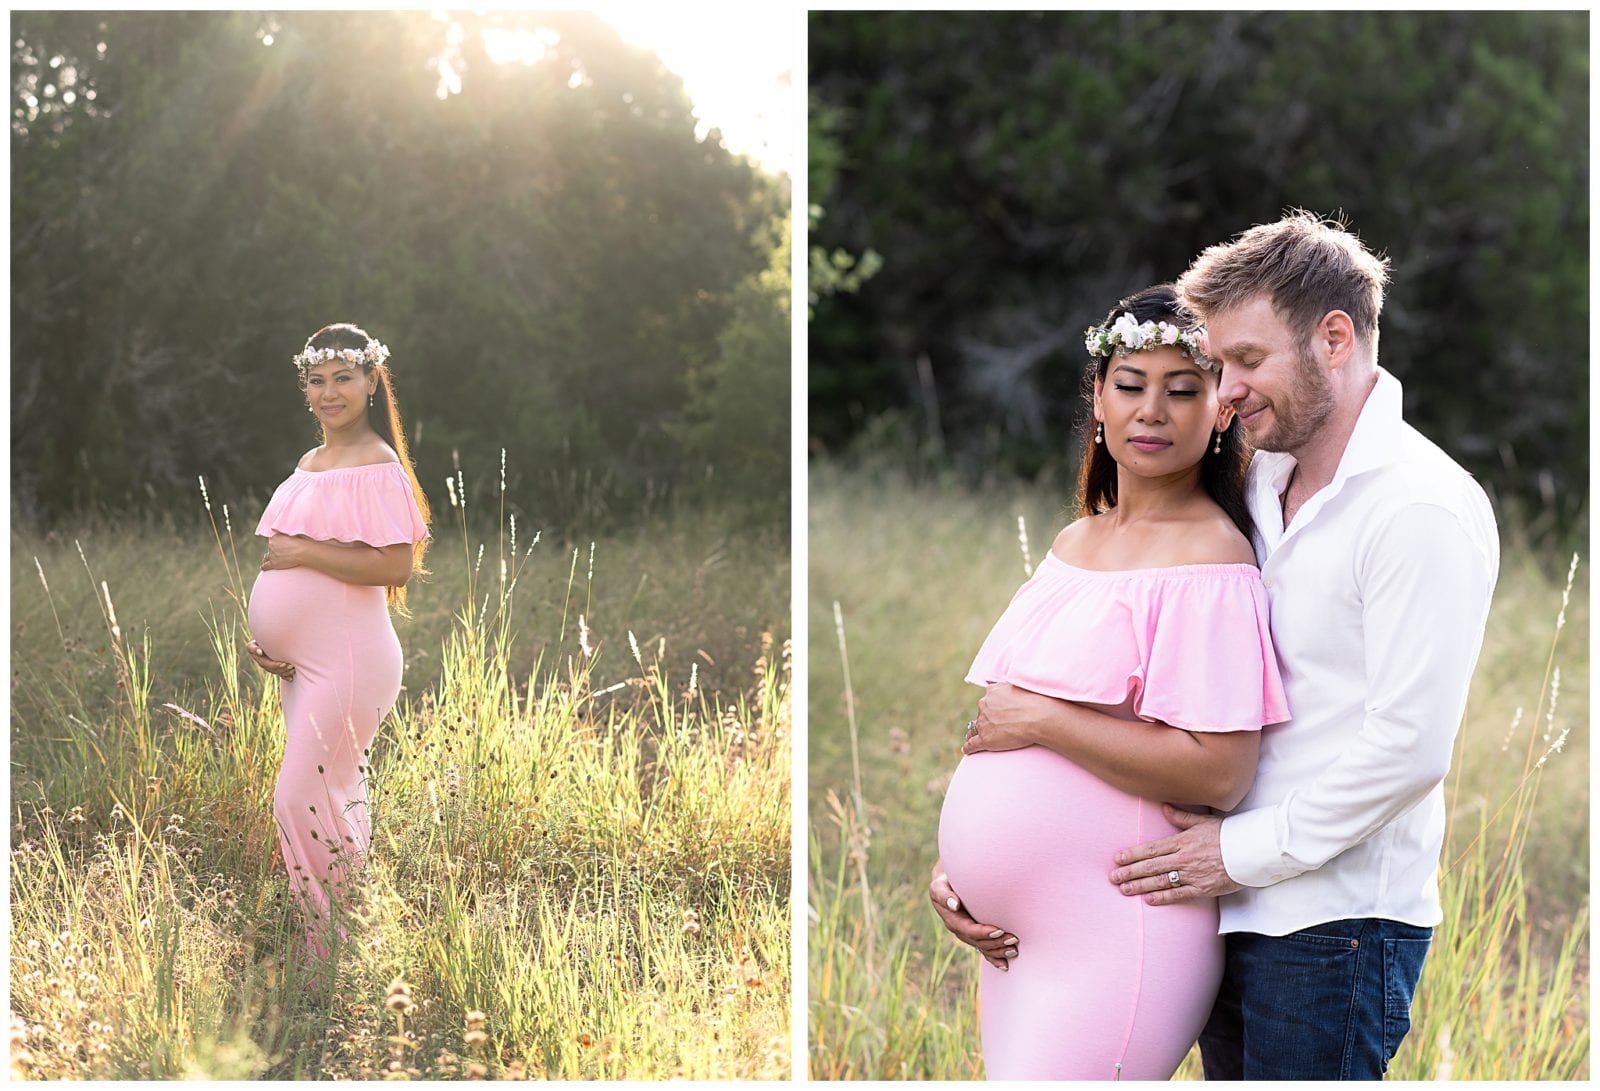 Maternity photos with a pink dress